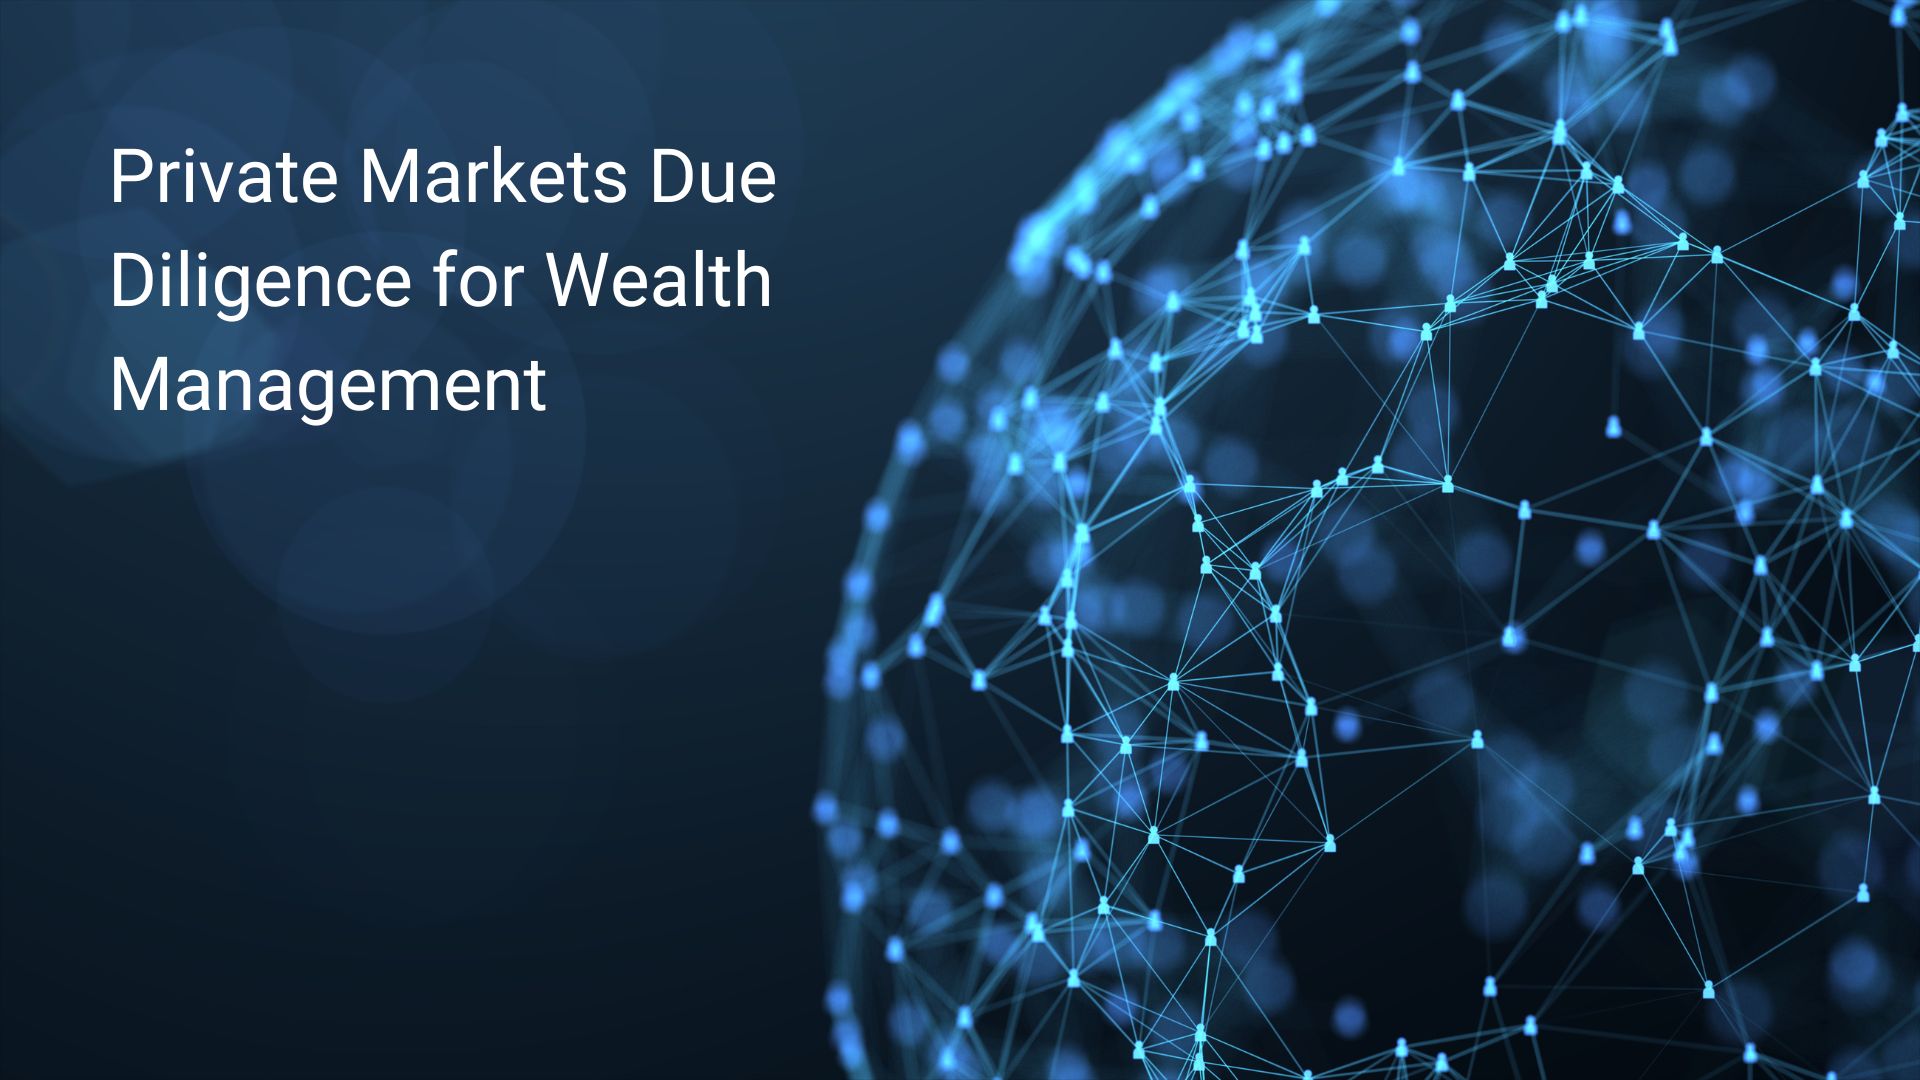 DV - Private Markets Due Diligence for Wealth Management